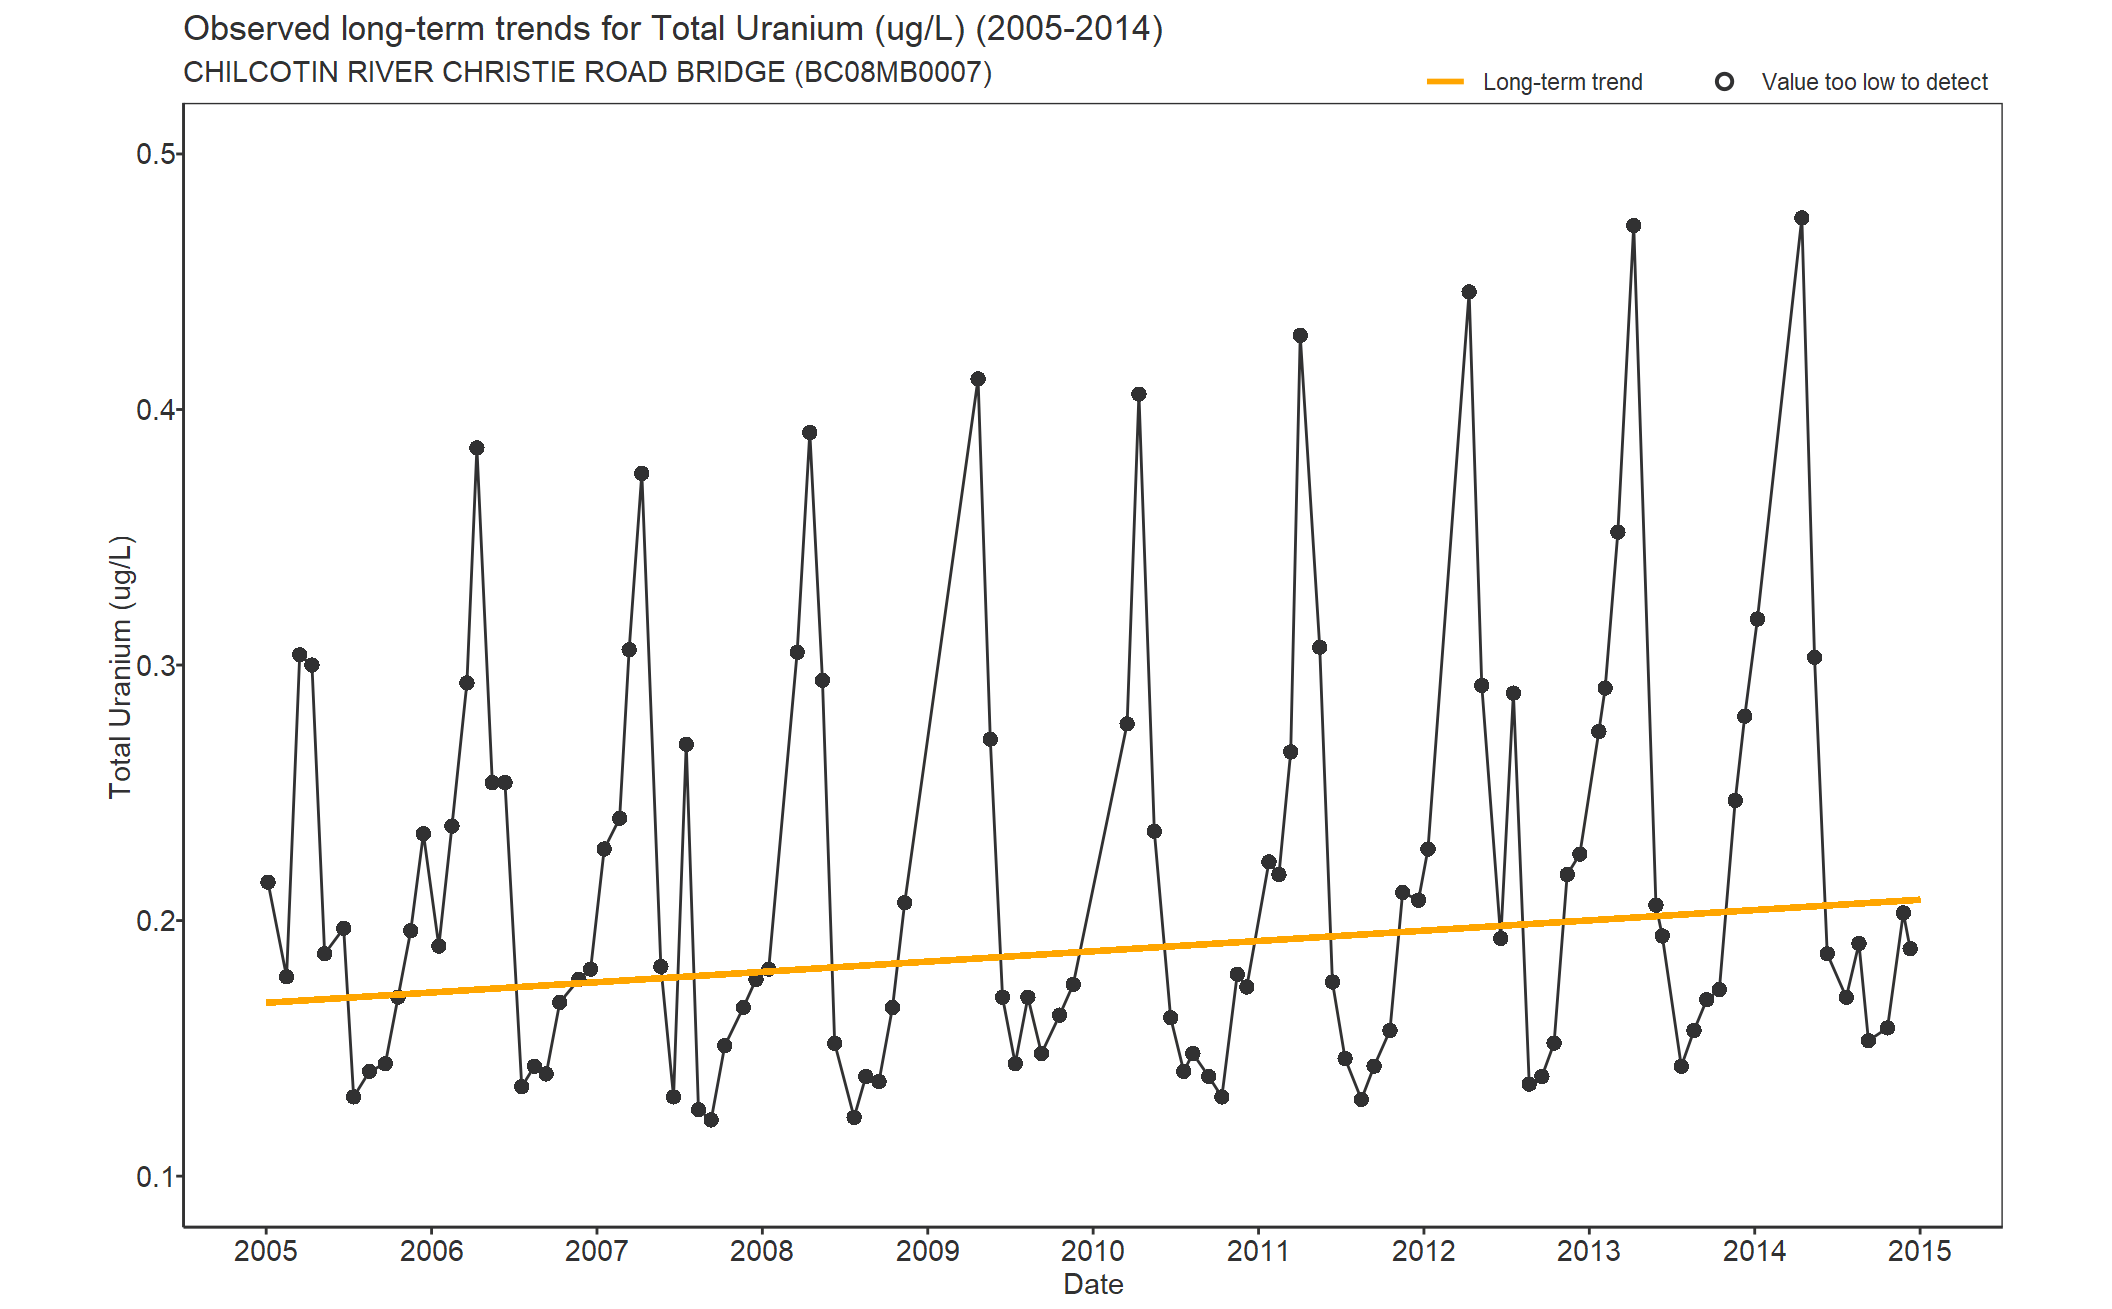 Observed long-term trends for Uranium Total (2005-2014)